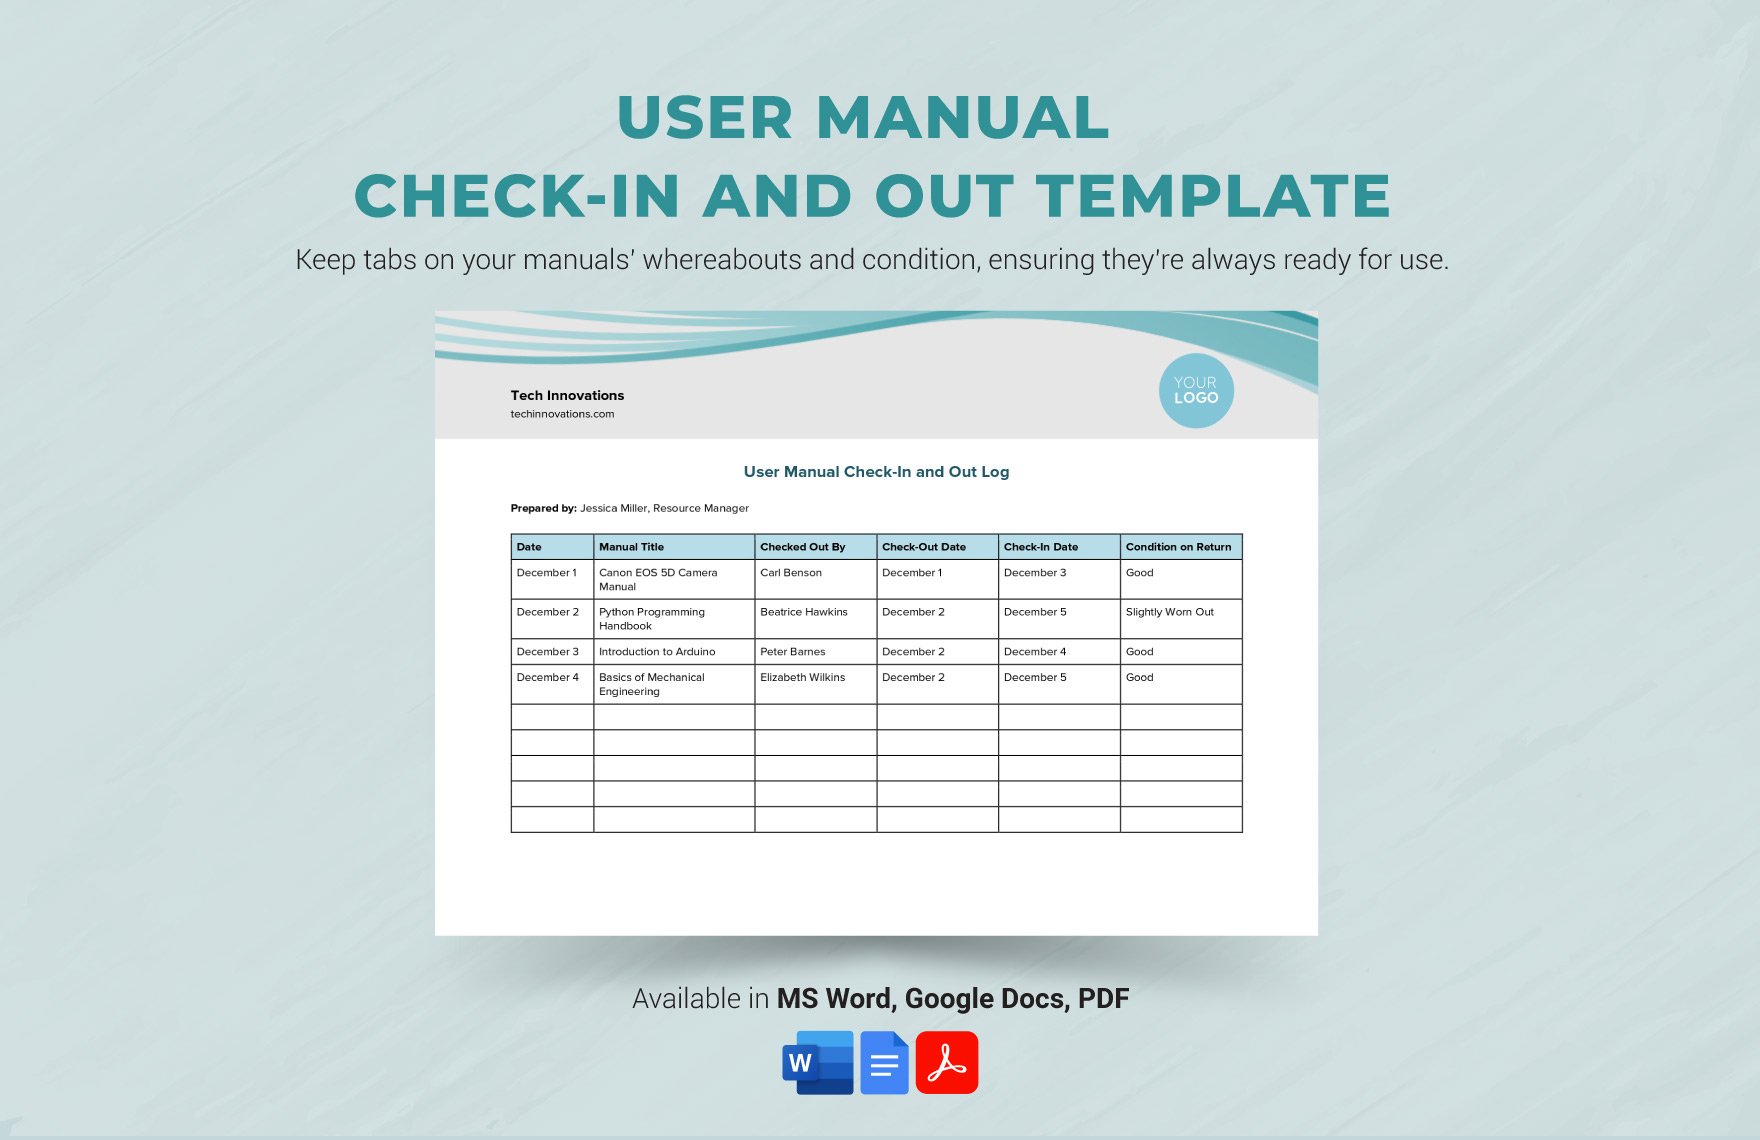 Free User Manual Check-in and Out Template